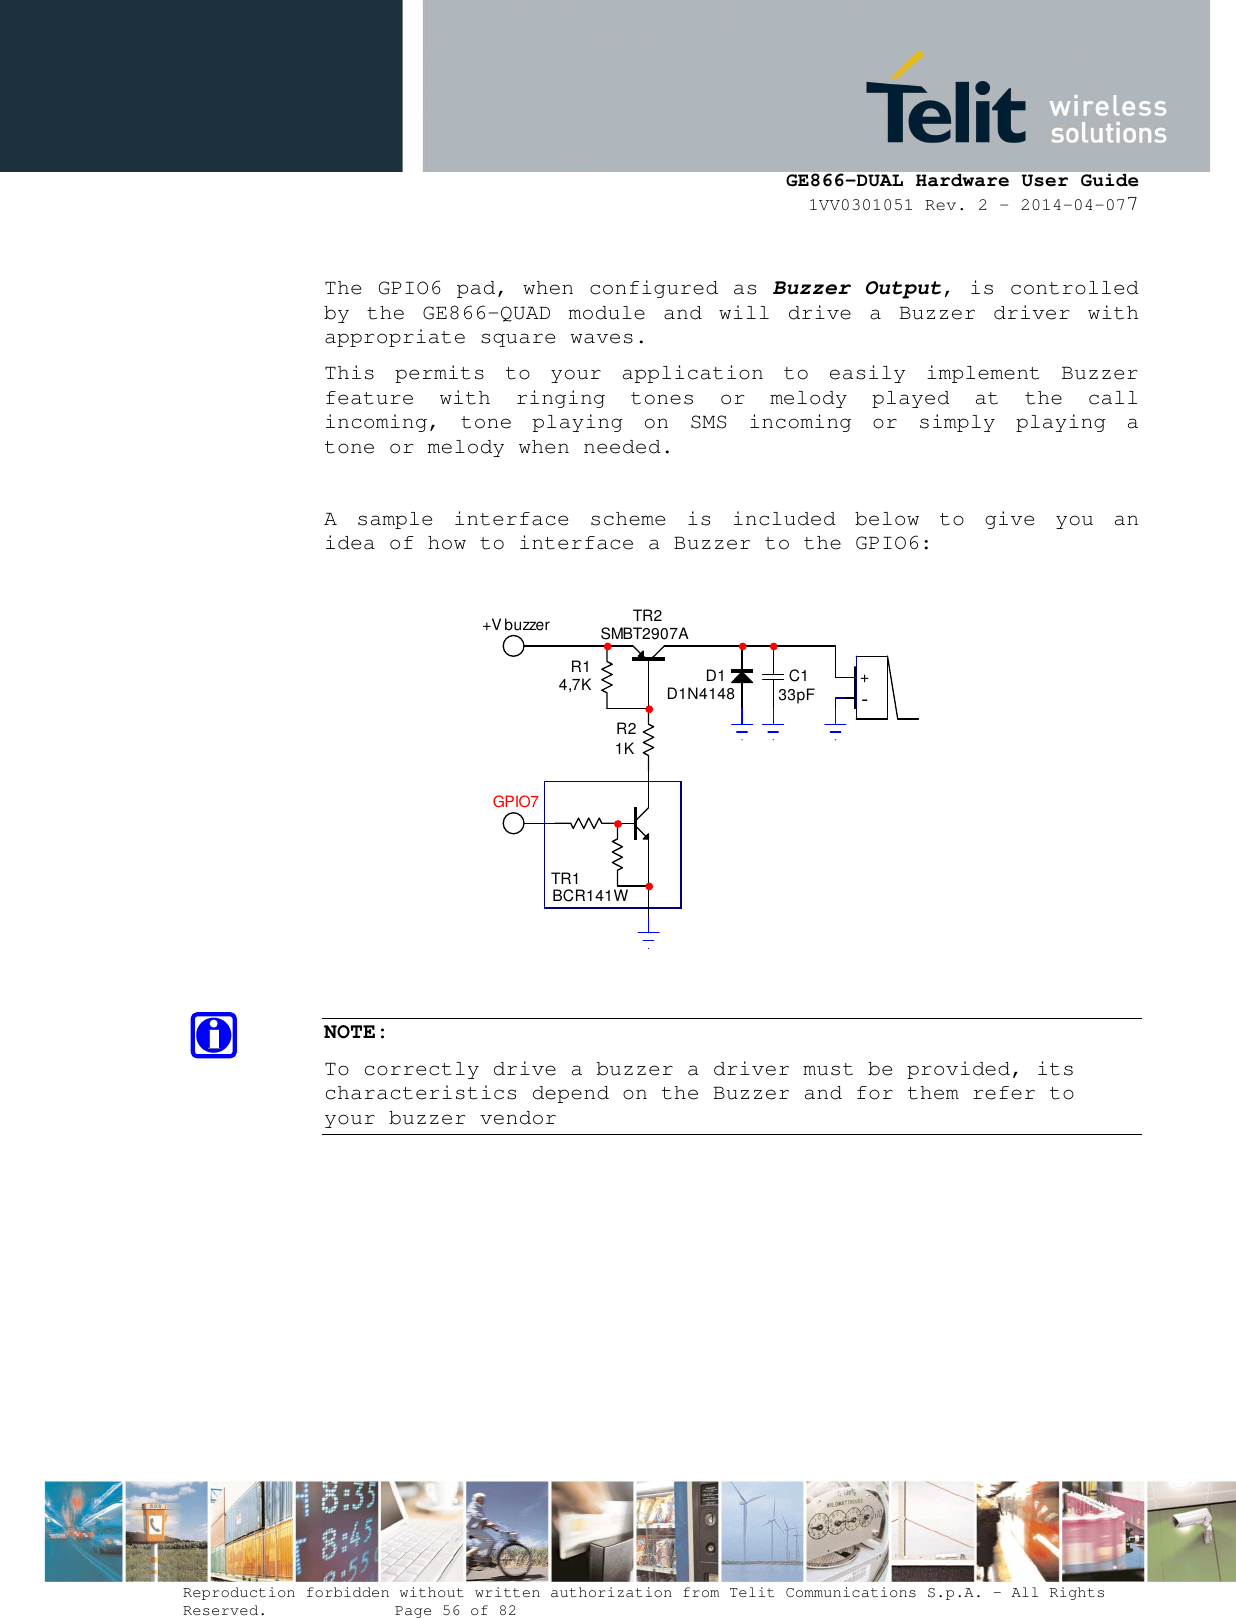      GE866-DUAL Hardware User Guide 1VV0301051 Rev. 2 – 2014-04-077  Reproduction forbidden without written authorization from Telit Communications S.p.A. - All Rights Reserved.    Page 56 of 82 Mod. 0805 2011-07 Rev.2  The GPIO6 pad, when configured as Buzzer Output, is controlled by  the  GE866-QUAD  module  and  will  drive  a  Buzzer  driver  with appropriate square waves. This  permits  to  your  application  to  easily  implement  Buzzer feature  with  ringing  tones  or  melody  played  at  the  call incoming,  tone  playing  on  SMS  incoming  or  simply  playing  a tone or melody when needed.  A  sample  interface  scheme  is  included  below  to  give  you  an idea of how to interface a Buzzer to the GPIO6:  TR1BCR141WTR2SMBT2907AR14,7KR21KD1D1N4148 C133pF +-+V buzzerGPIO7  NOTE: To correctly drive a buzzer a driver must be provided, its characteristics depend on the Buzzer and for them refer to your buzzer vendor  